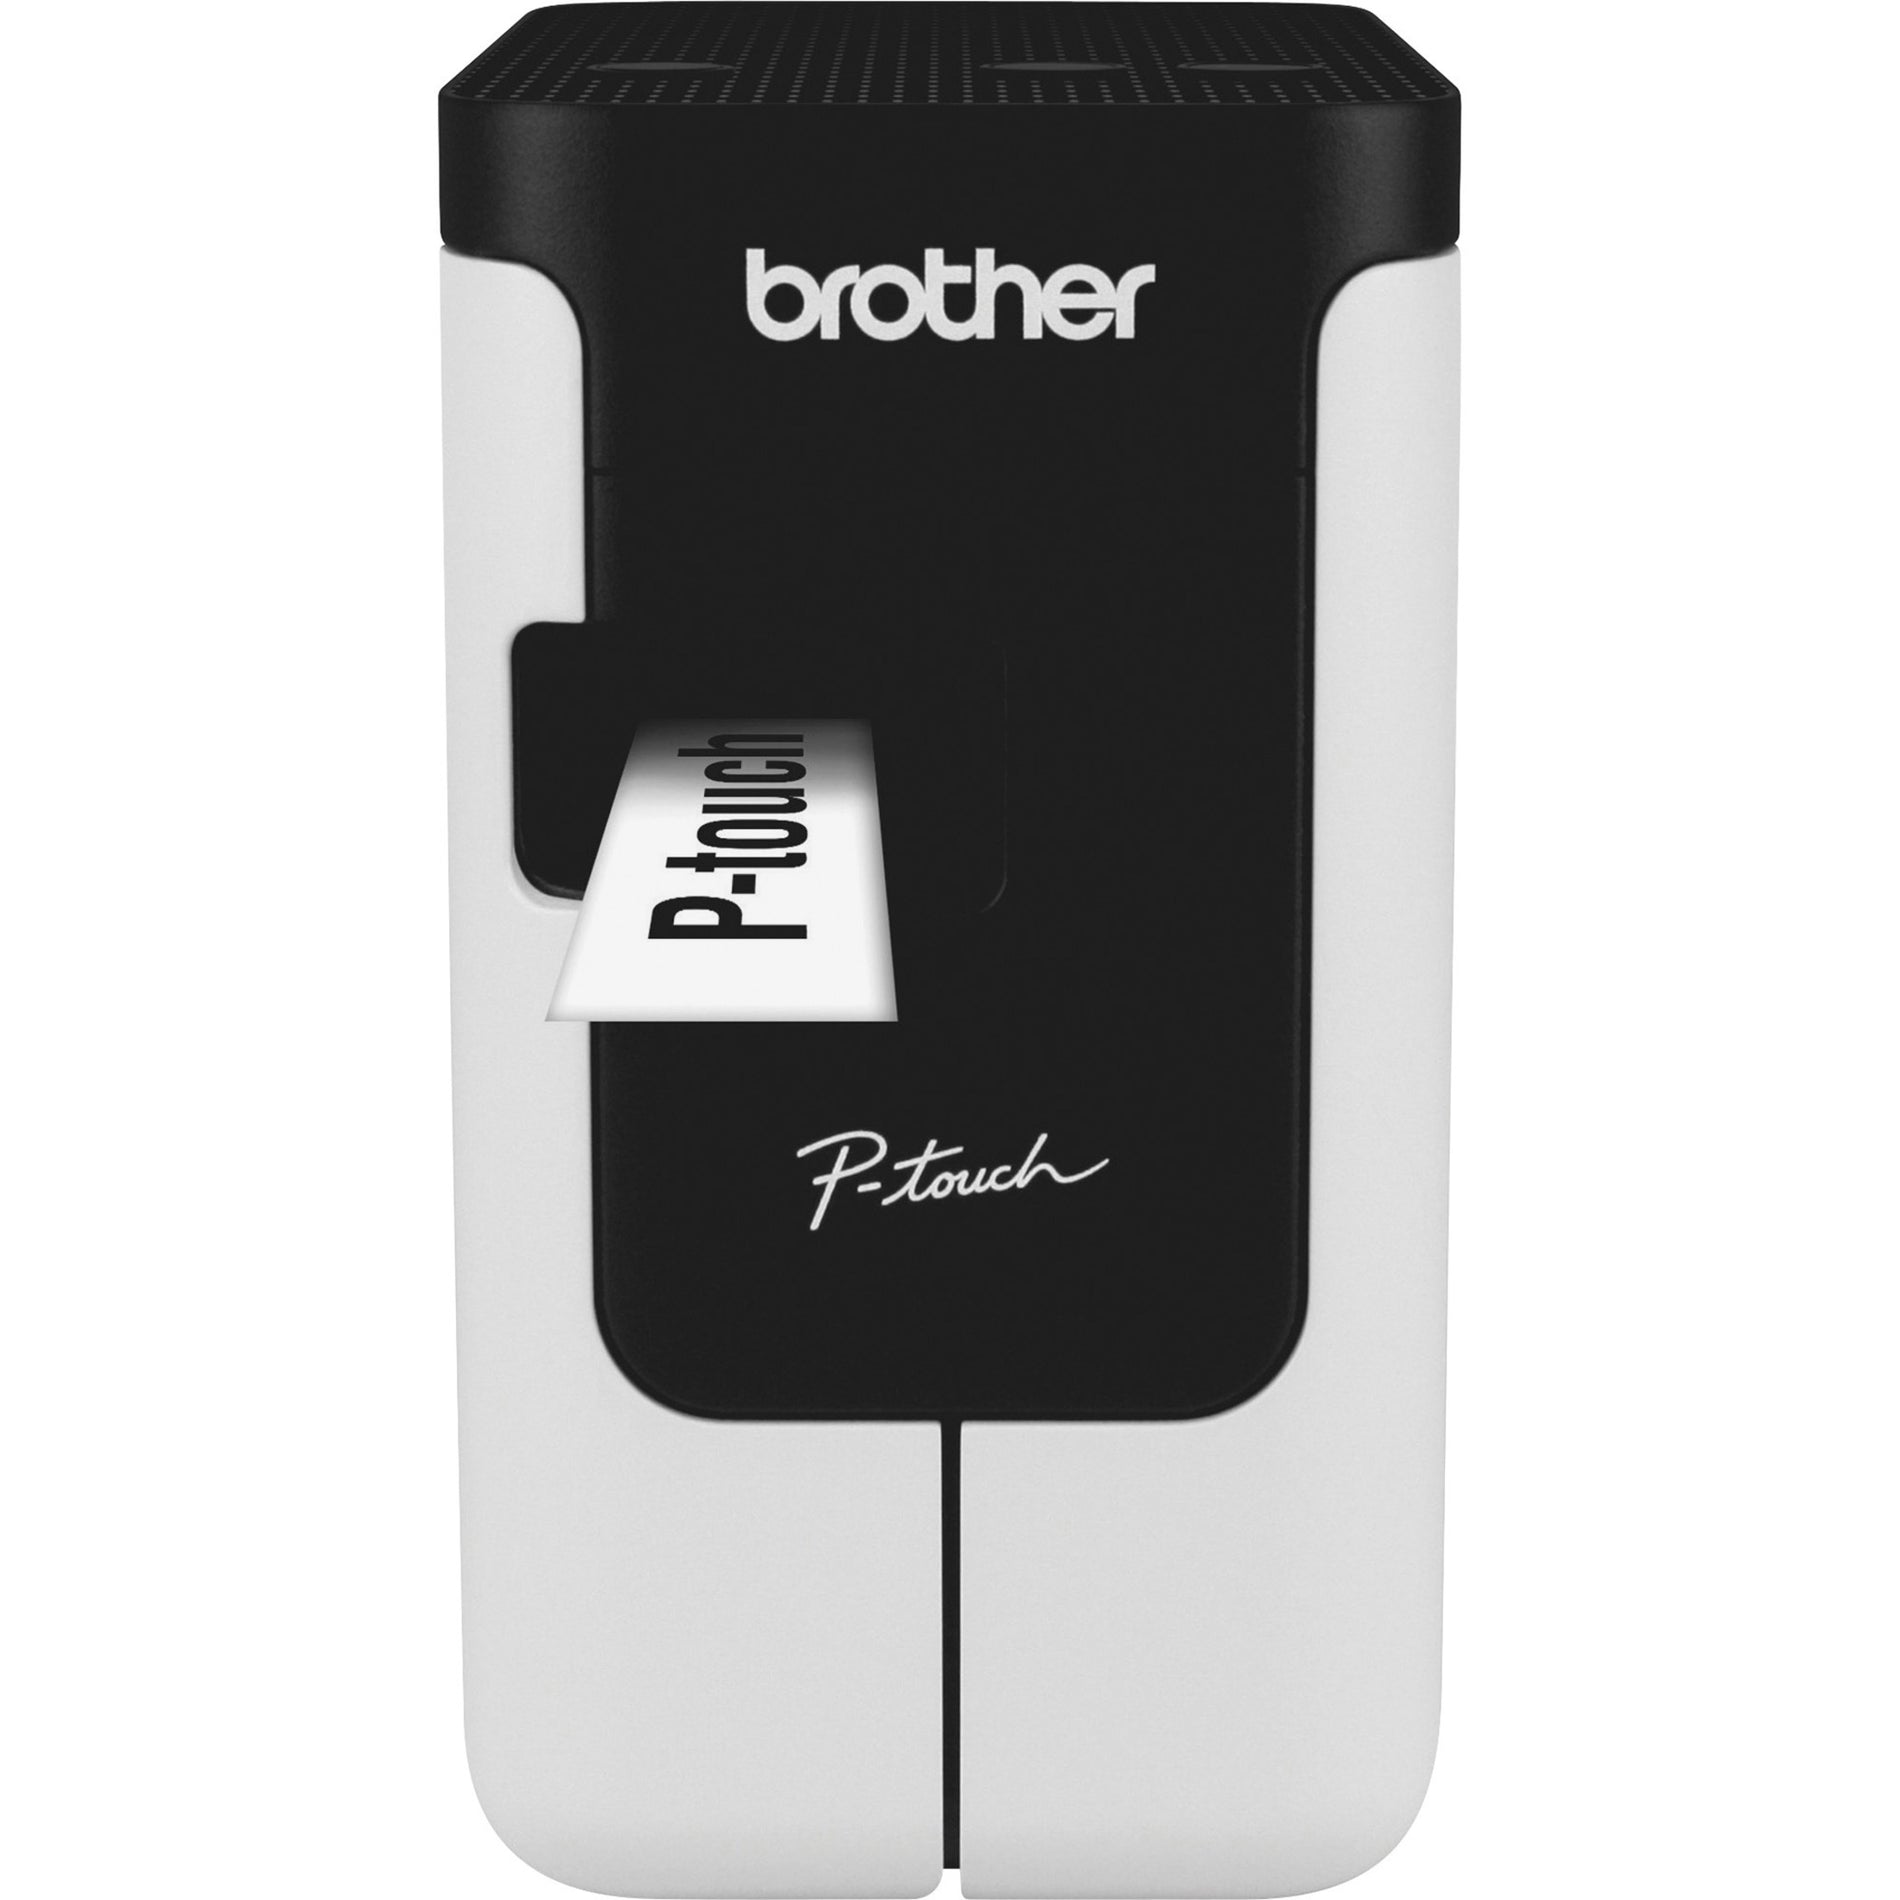 Brother PT-P700 PC-Connectable Label Maker, ABCD Keyboard, Repeat Printing, Print Preview